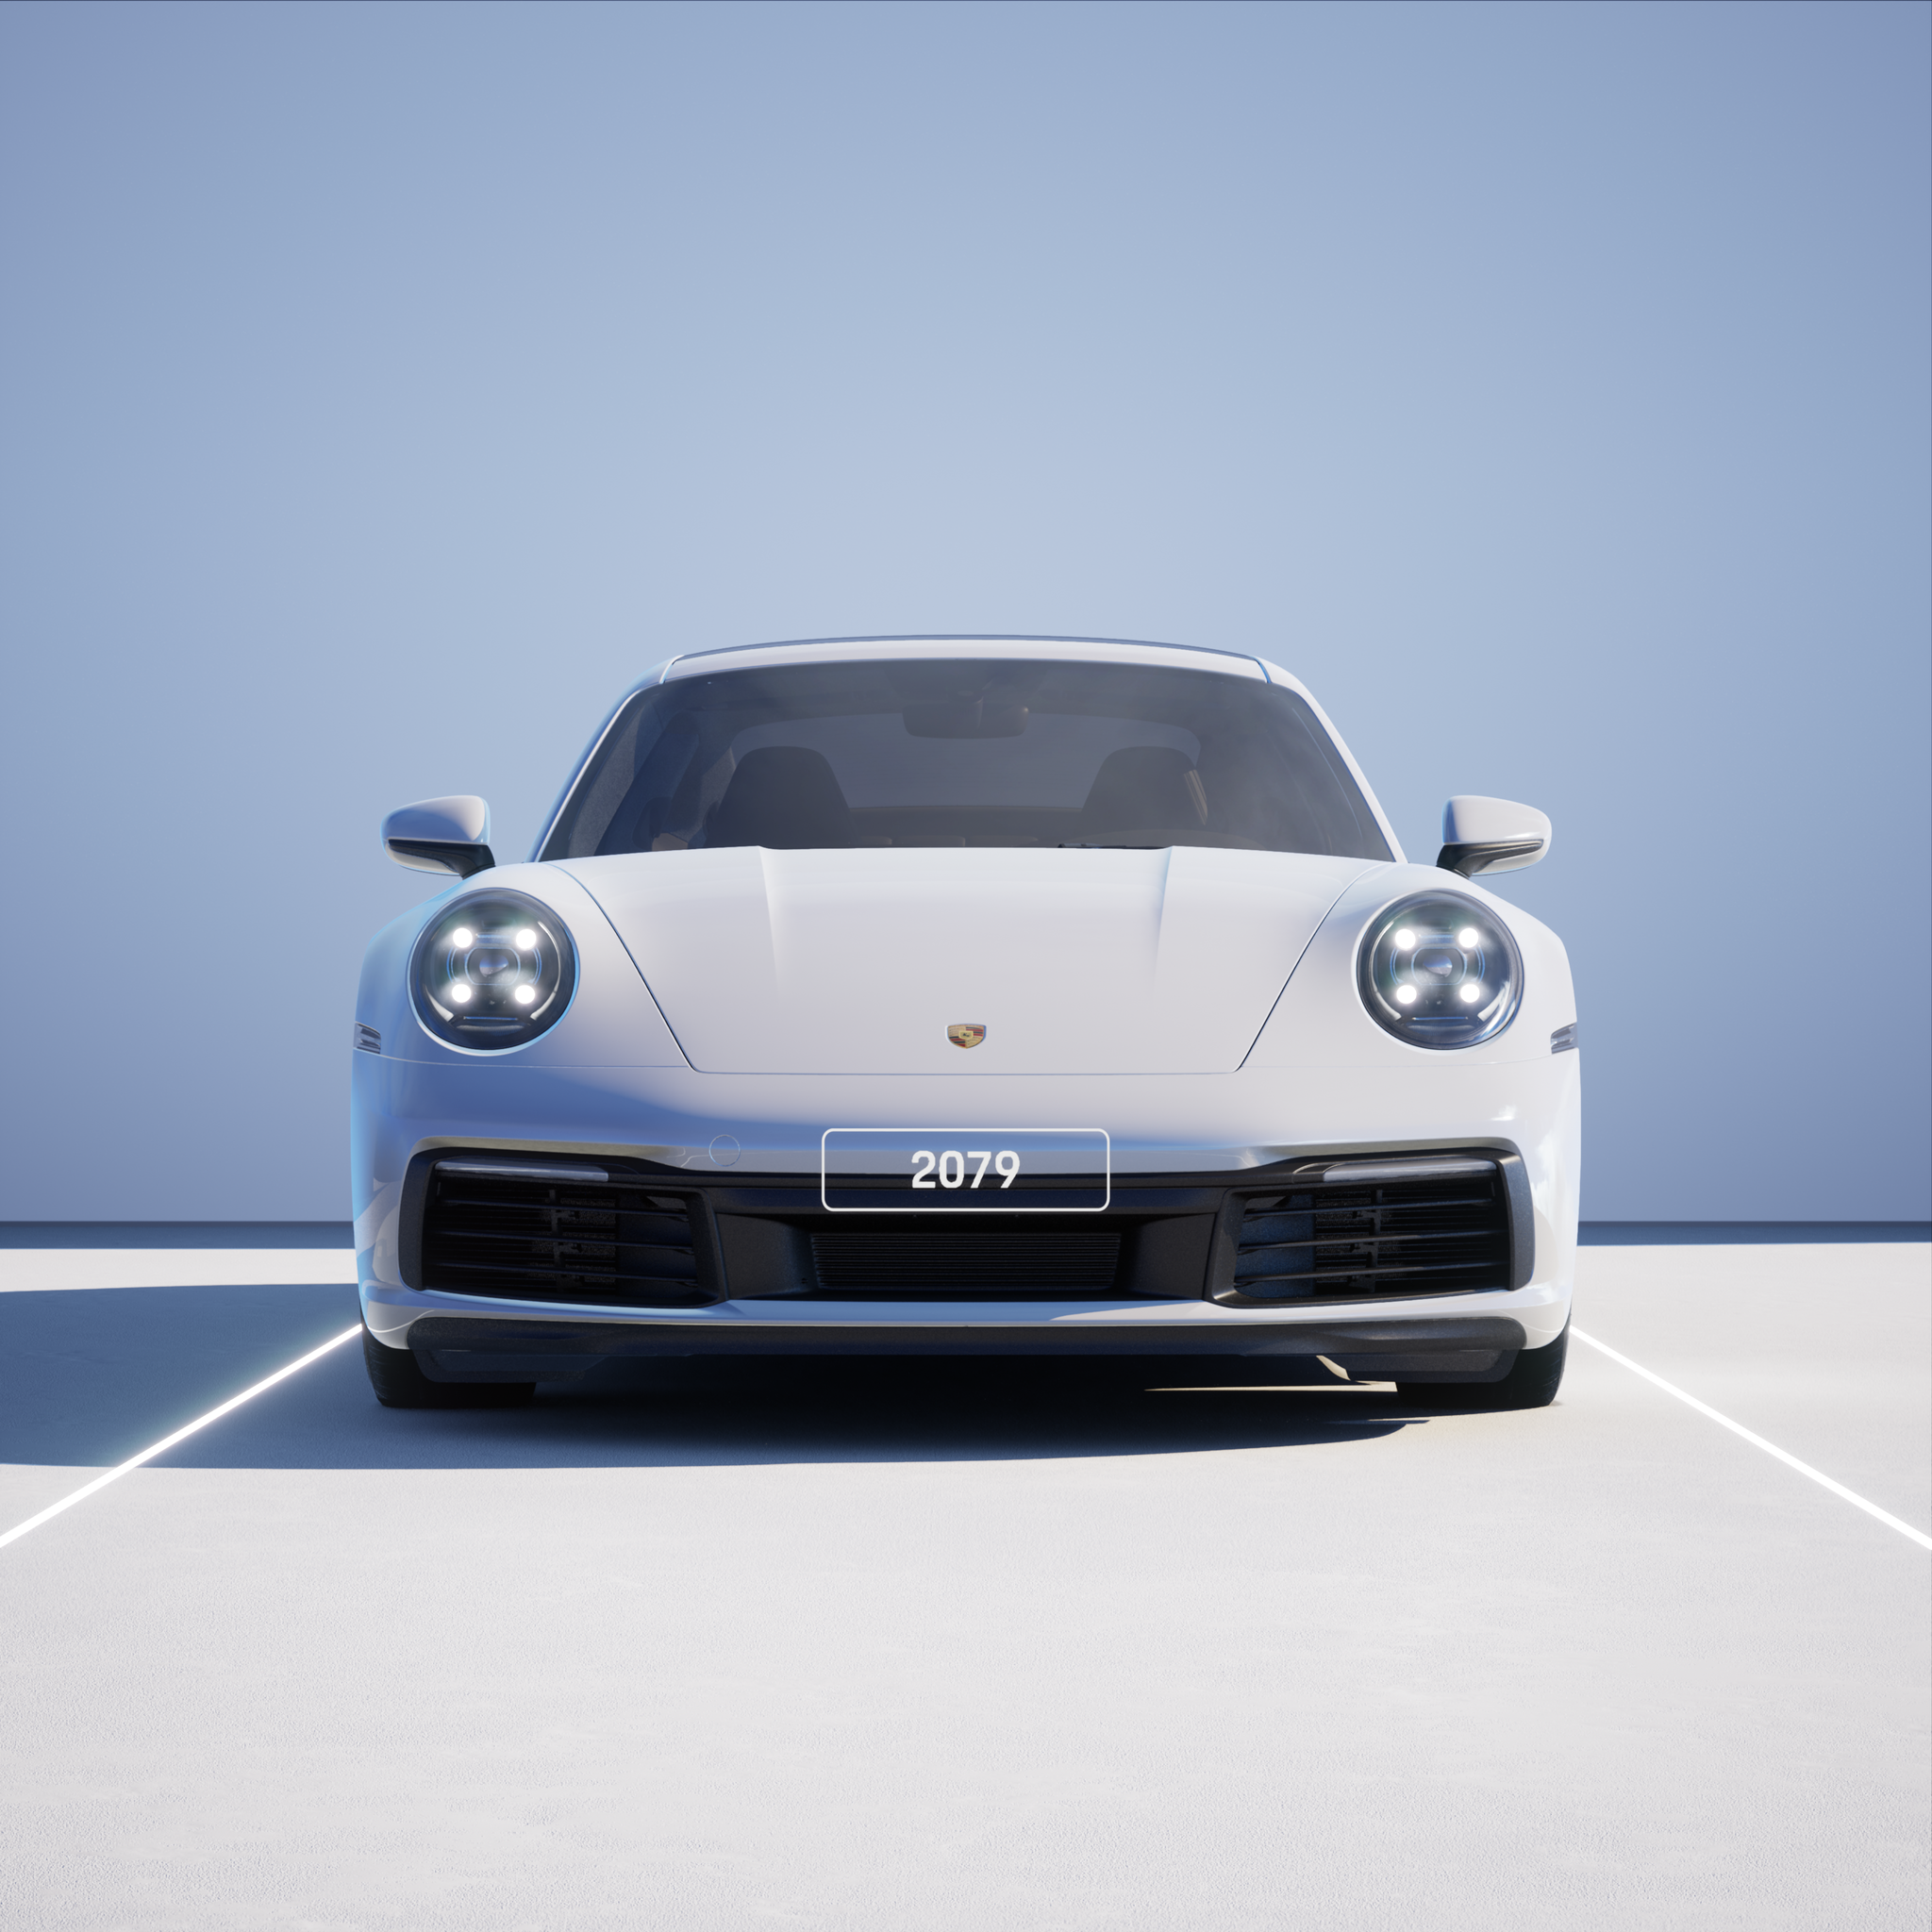 The PORSCHΞ 911 2079 image in phase